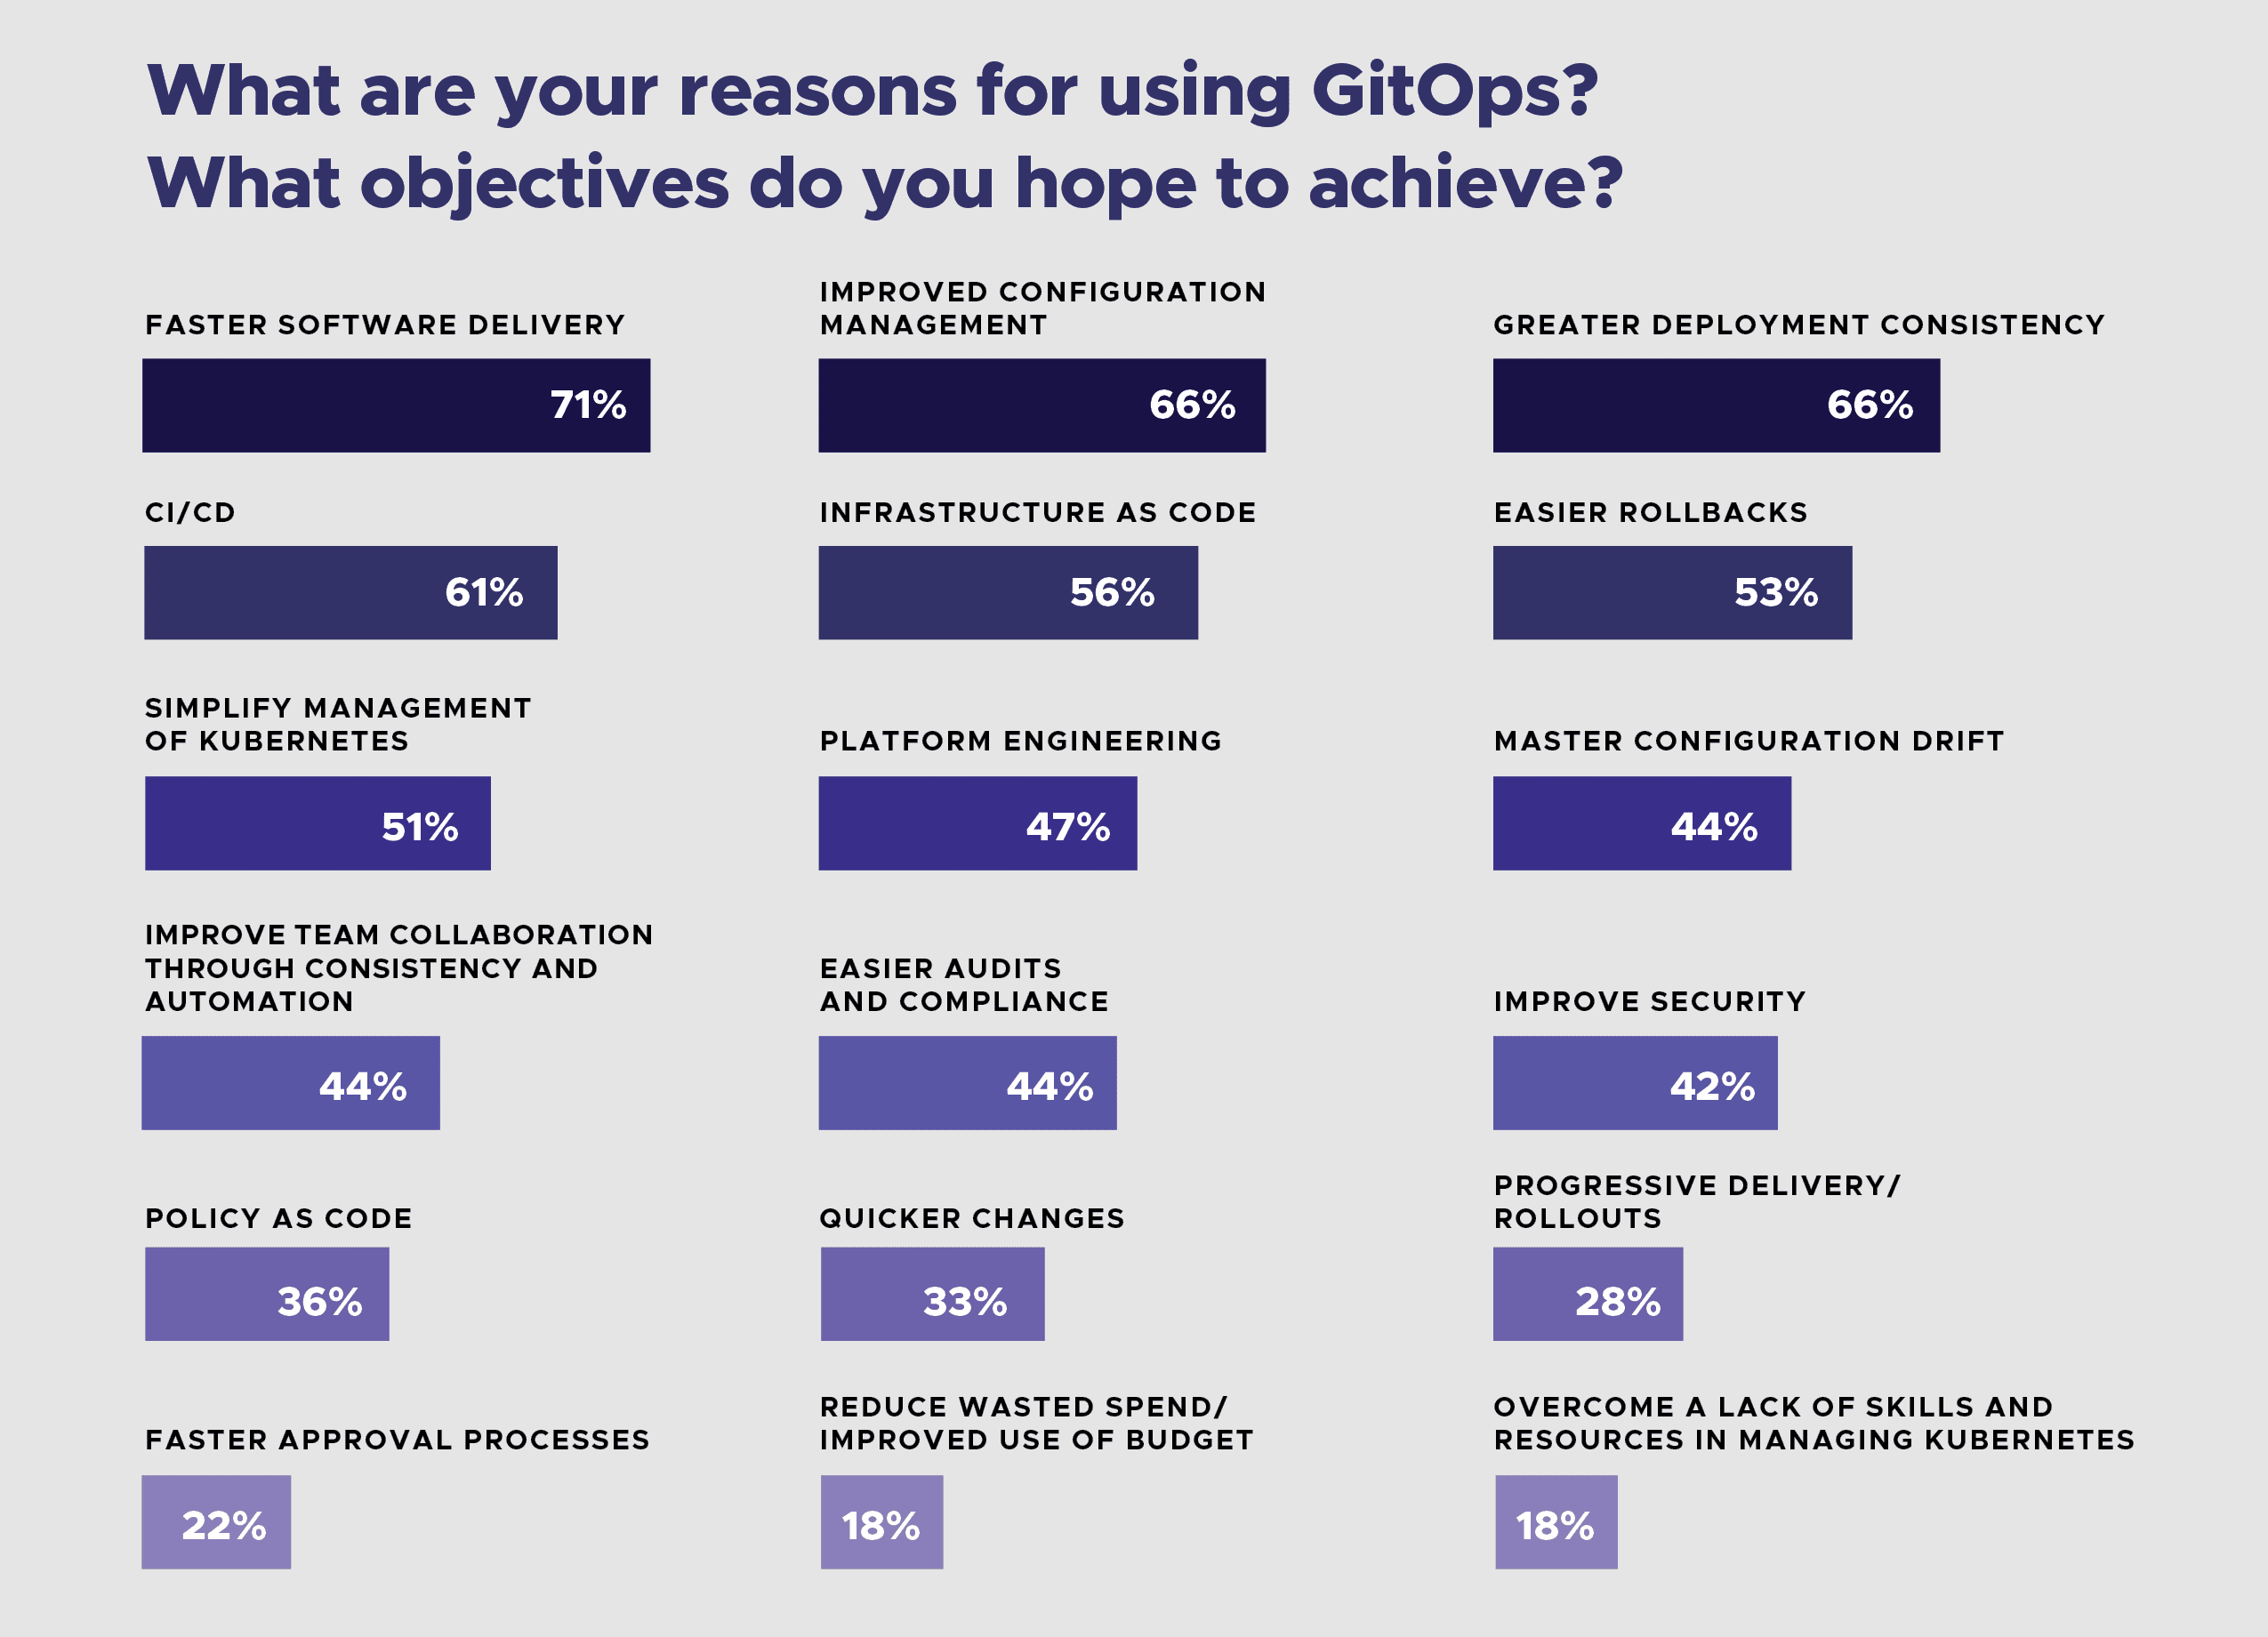 Bar chart showing respondent's respond towards question "What are your reasons for using GitOps? What objectives do you hope to achieve?" 71% of the respondents chose "faster software delivery", 66% chose "improved configuration management" and "greater deployment consistency"